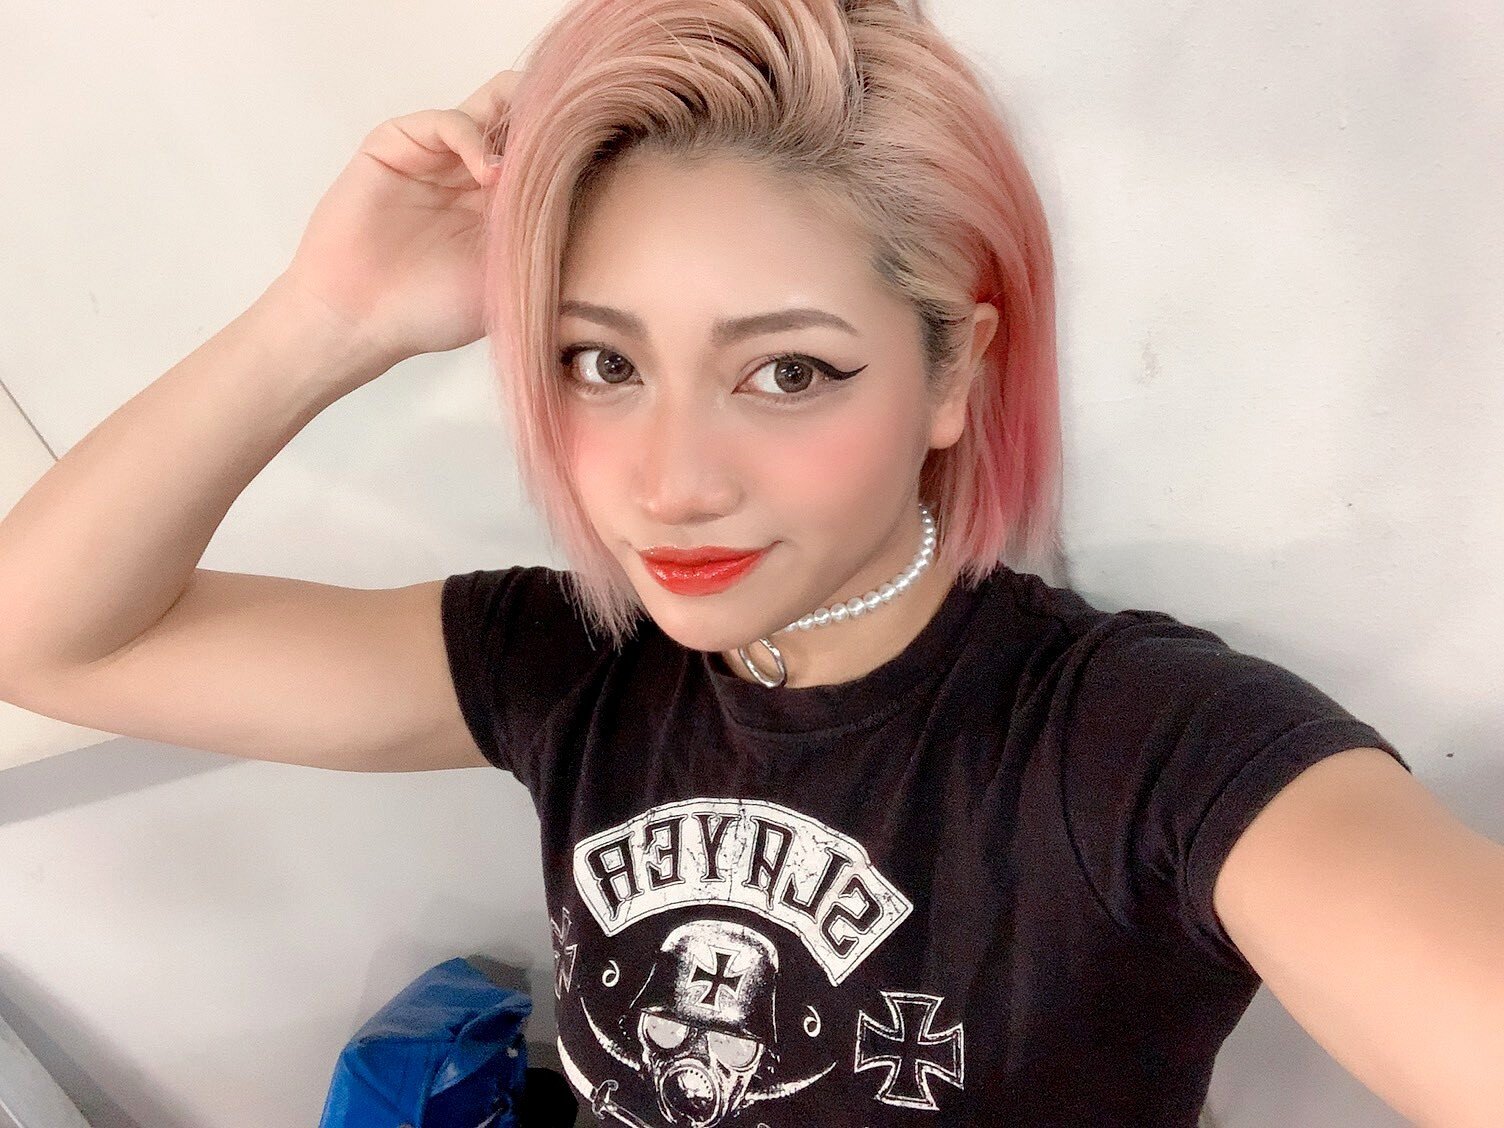 Hana Kimura, a female professional wrestler who was among the cast of the popular Japanese reality series Terrace House, died on Saturday at the age of 22. Fans and cast members have blamed her death on cyberbullying. Photo: Twitter